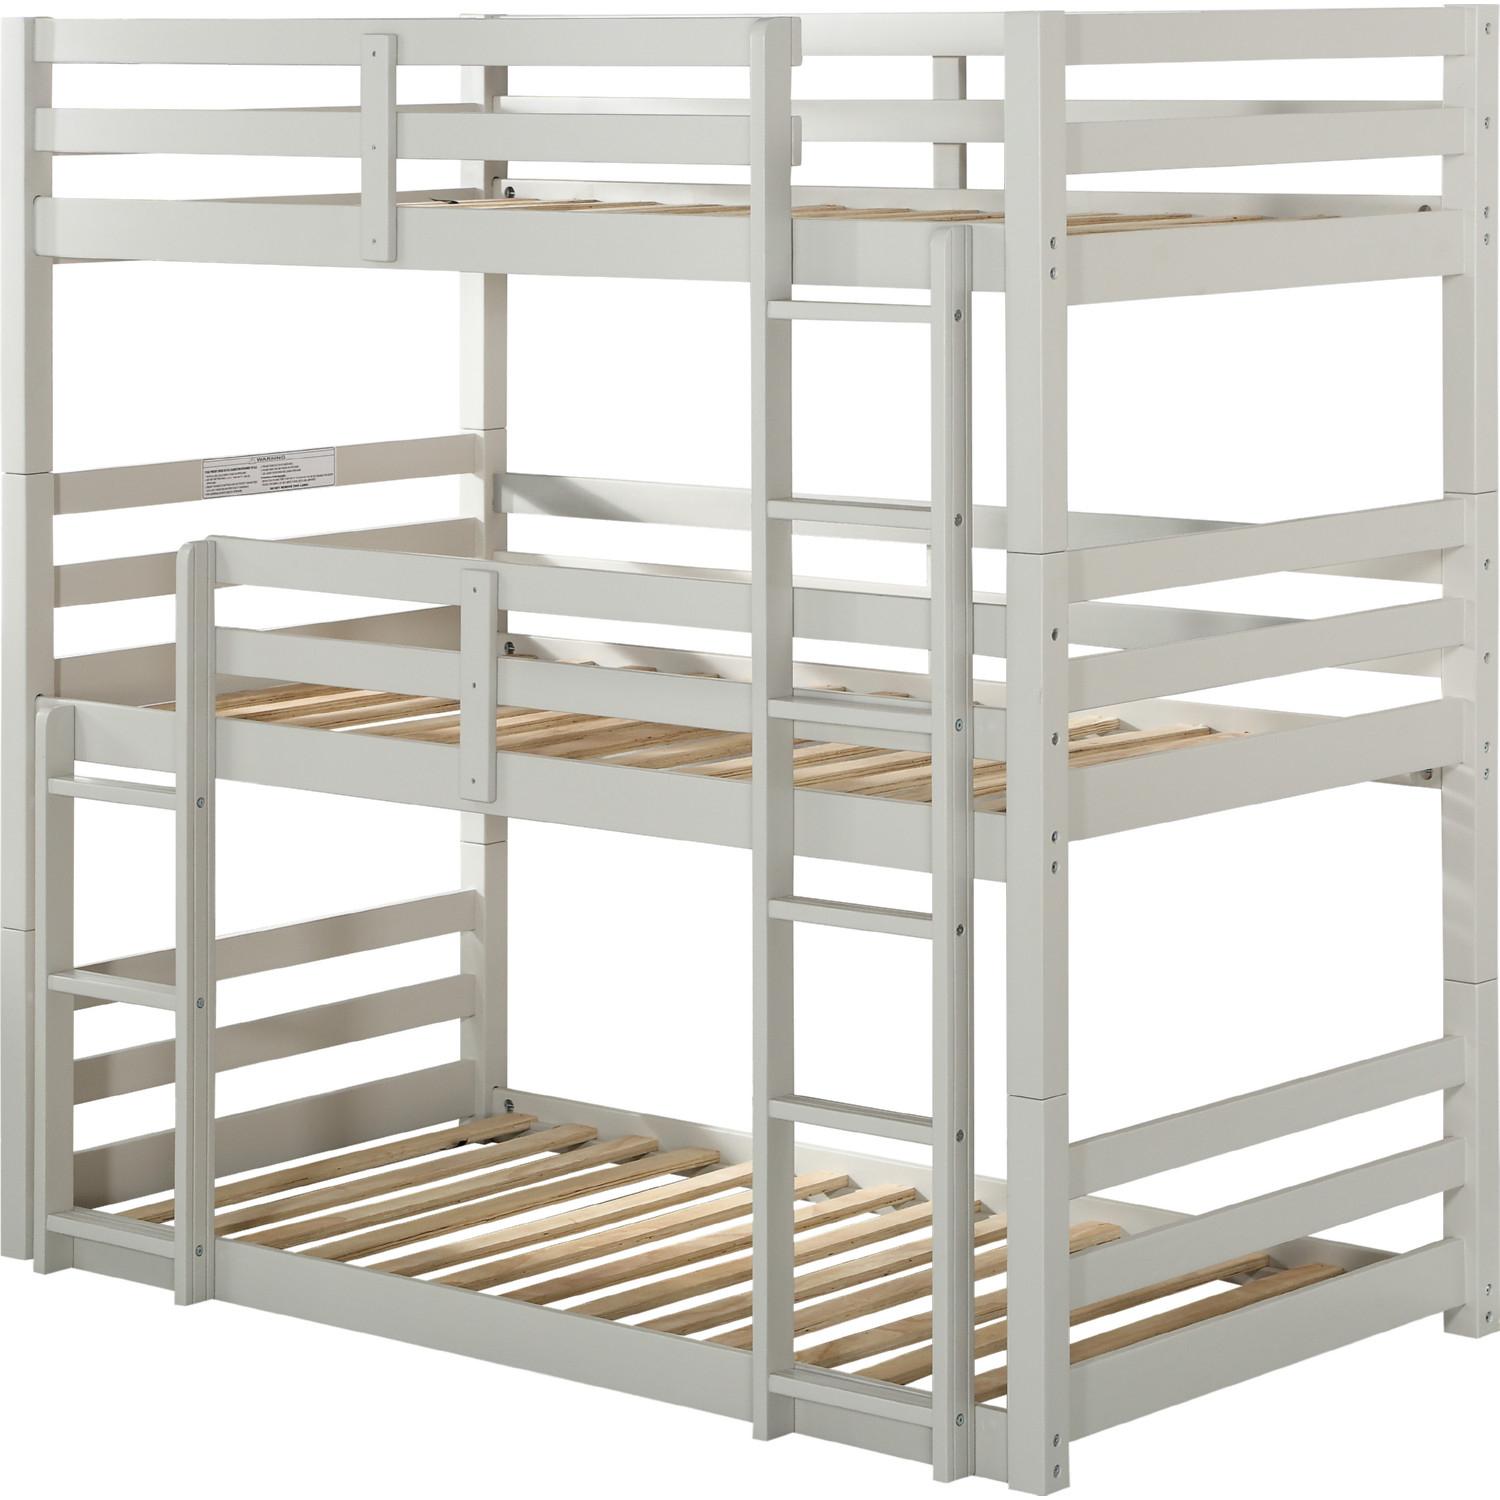 Simple T/t/t triple bunk bed Ronnie 37420 in Light Gray 